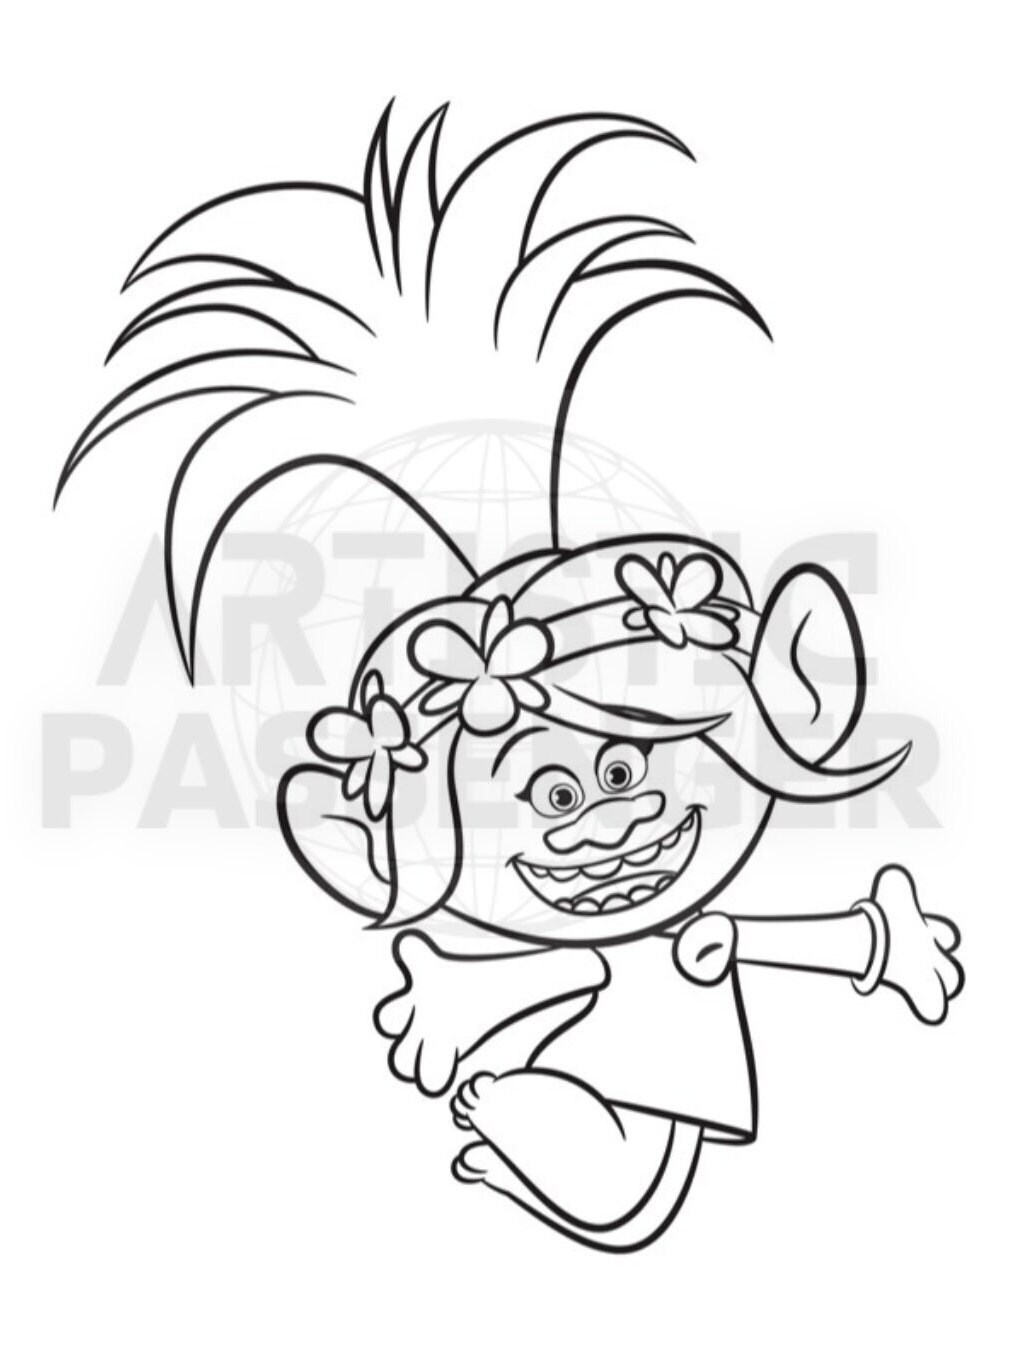 Printable trolls coloring pages for kids printable digital pages